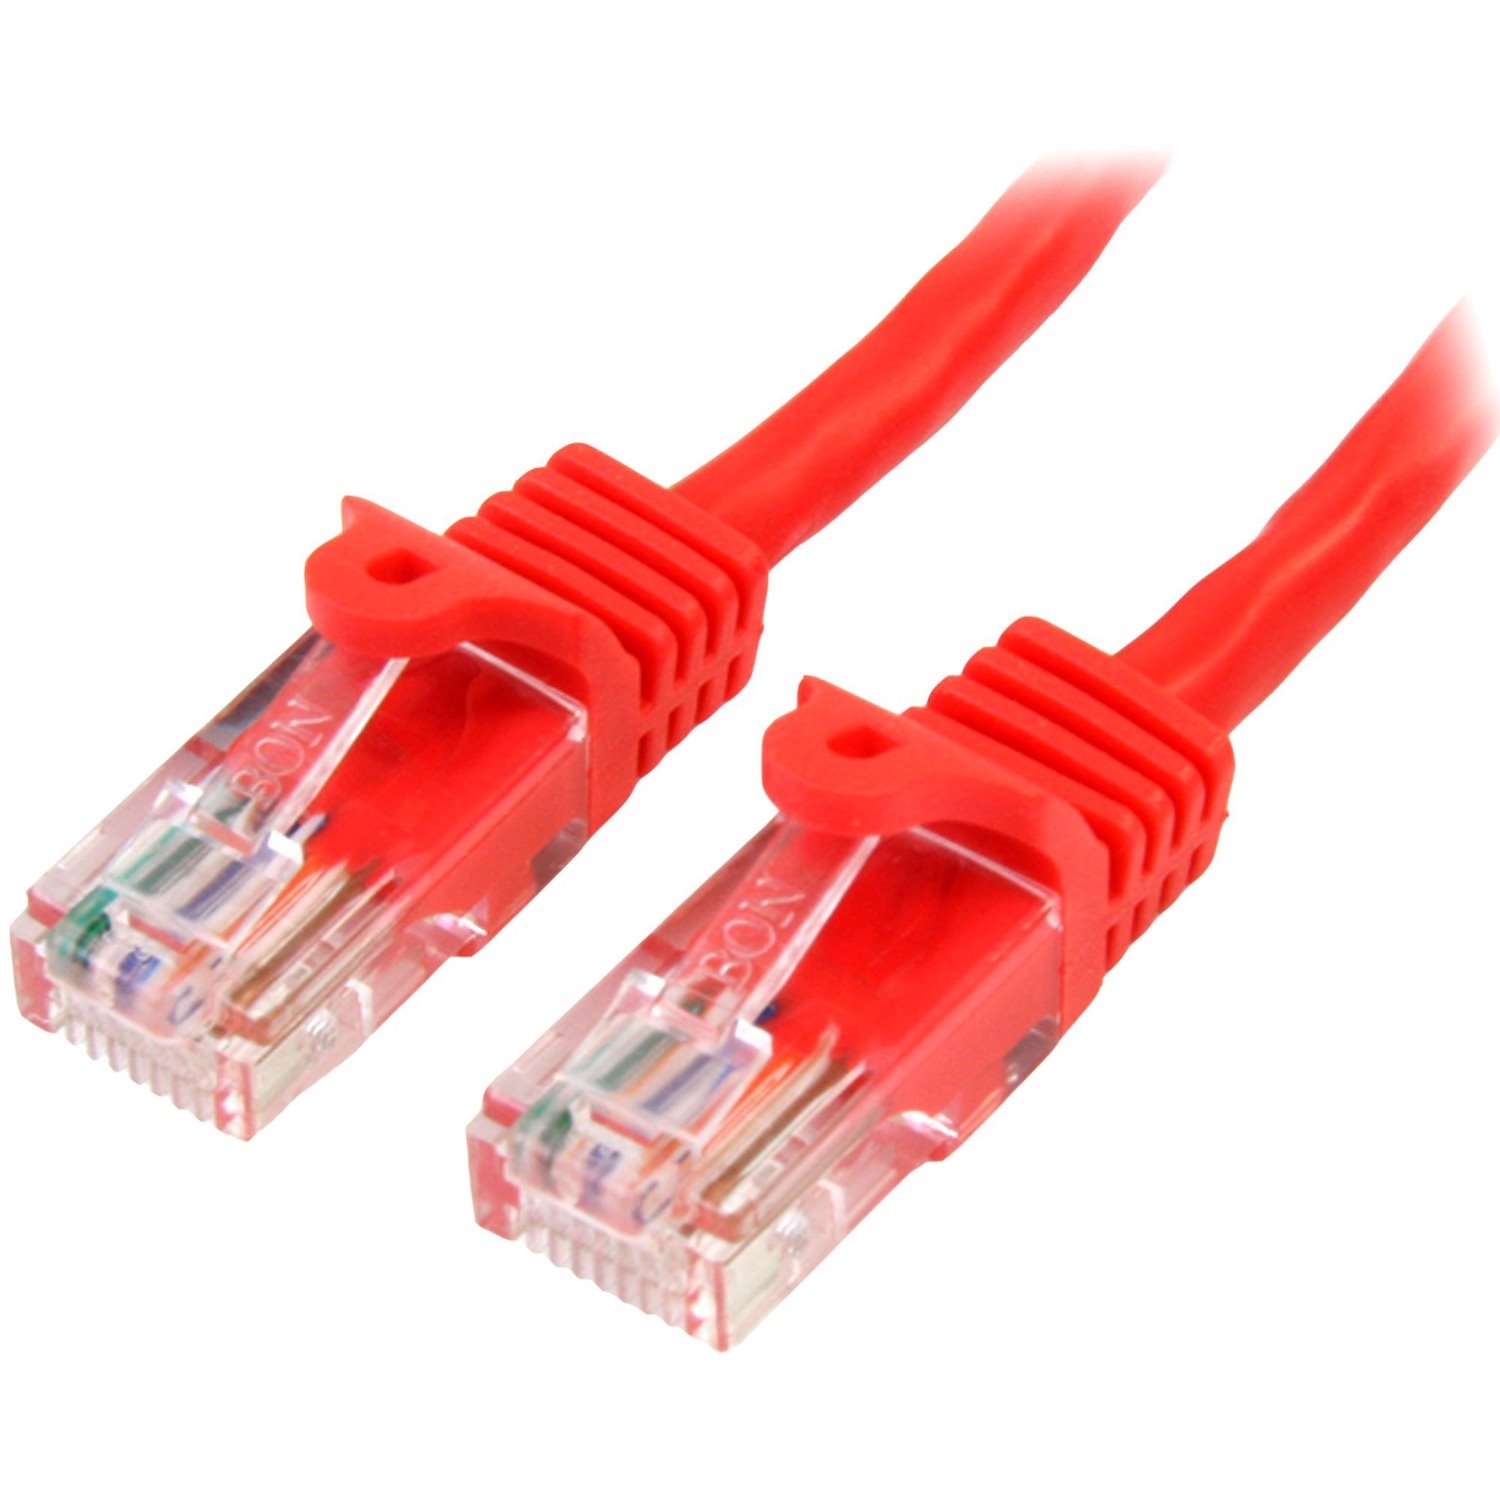 StarTech.com 2 m Red Cat5e Snagless RJ45 UTP Patch Cable - 2m Patch Cord - Ethernet Patch Cable - RJ45 Male to Male Cat 5e Cable